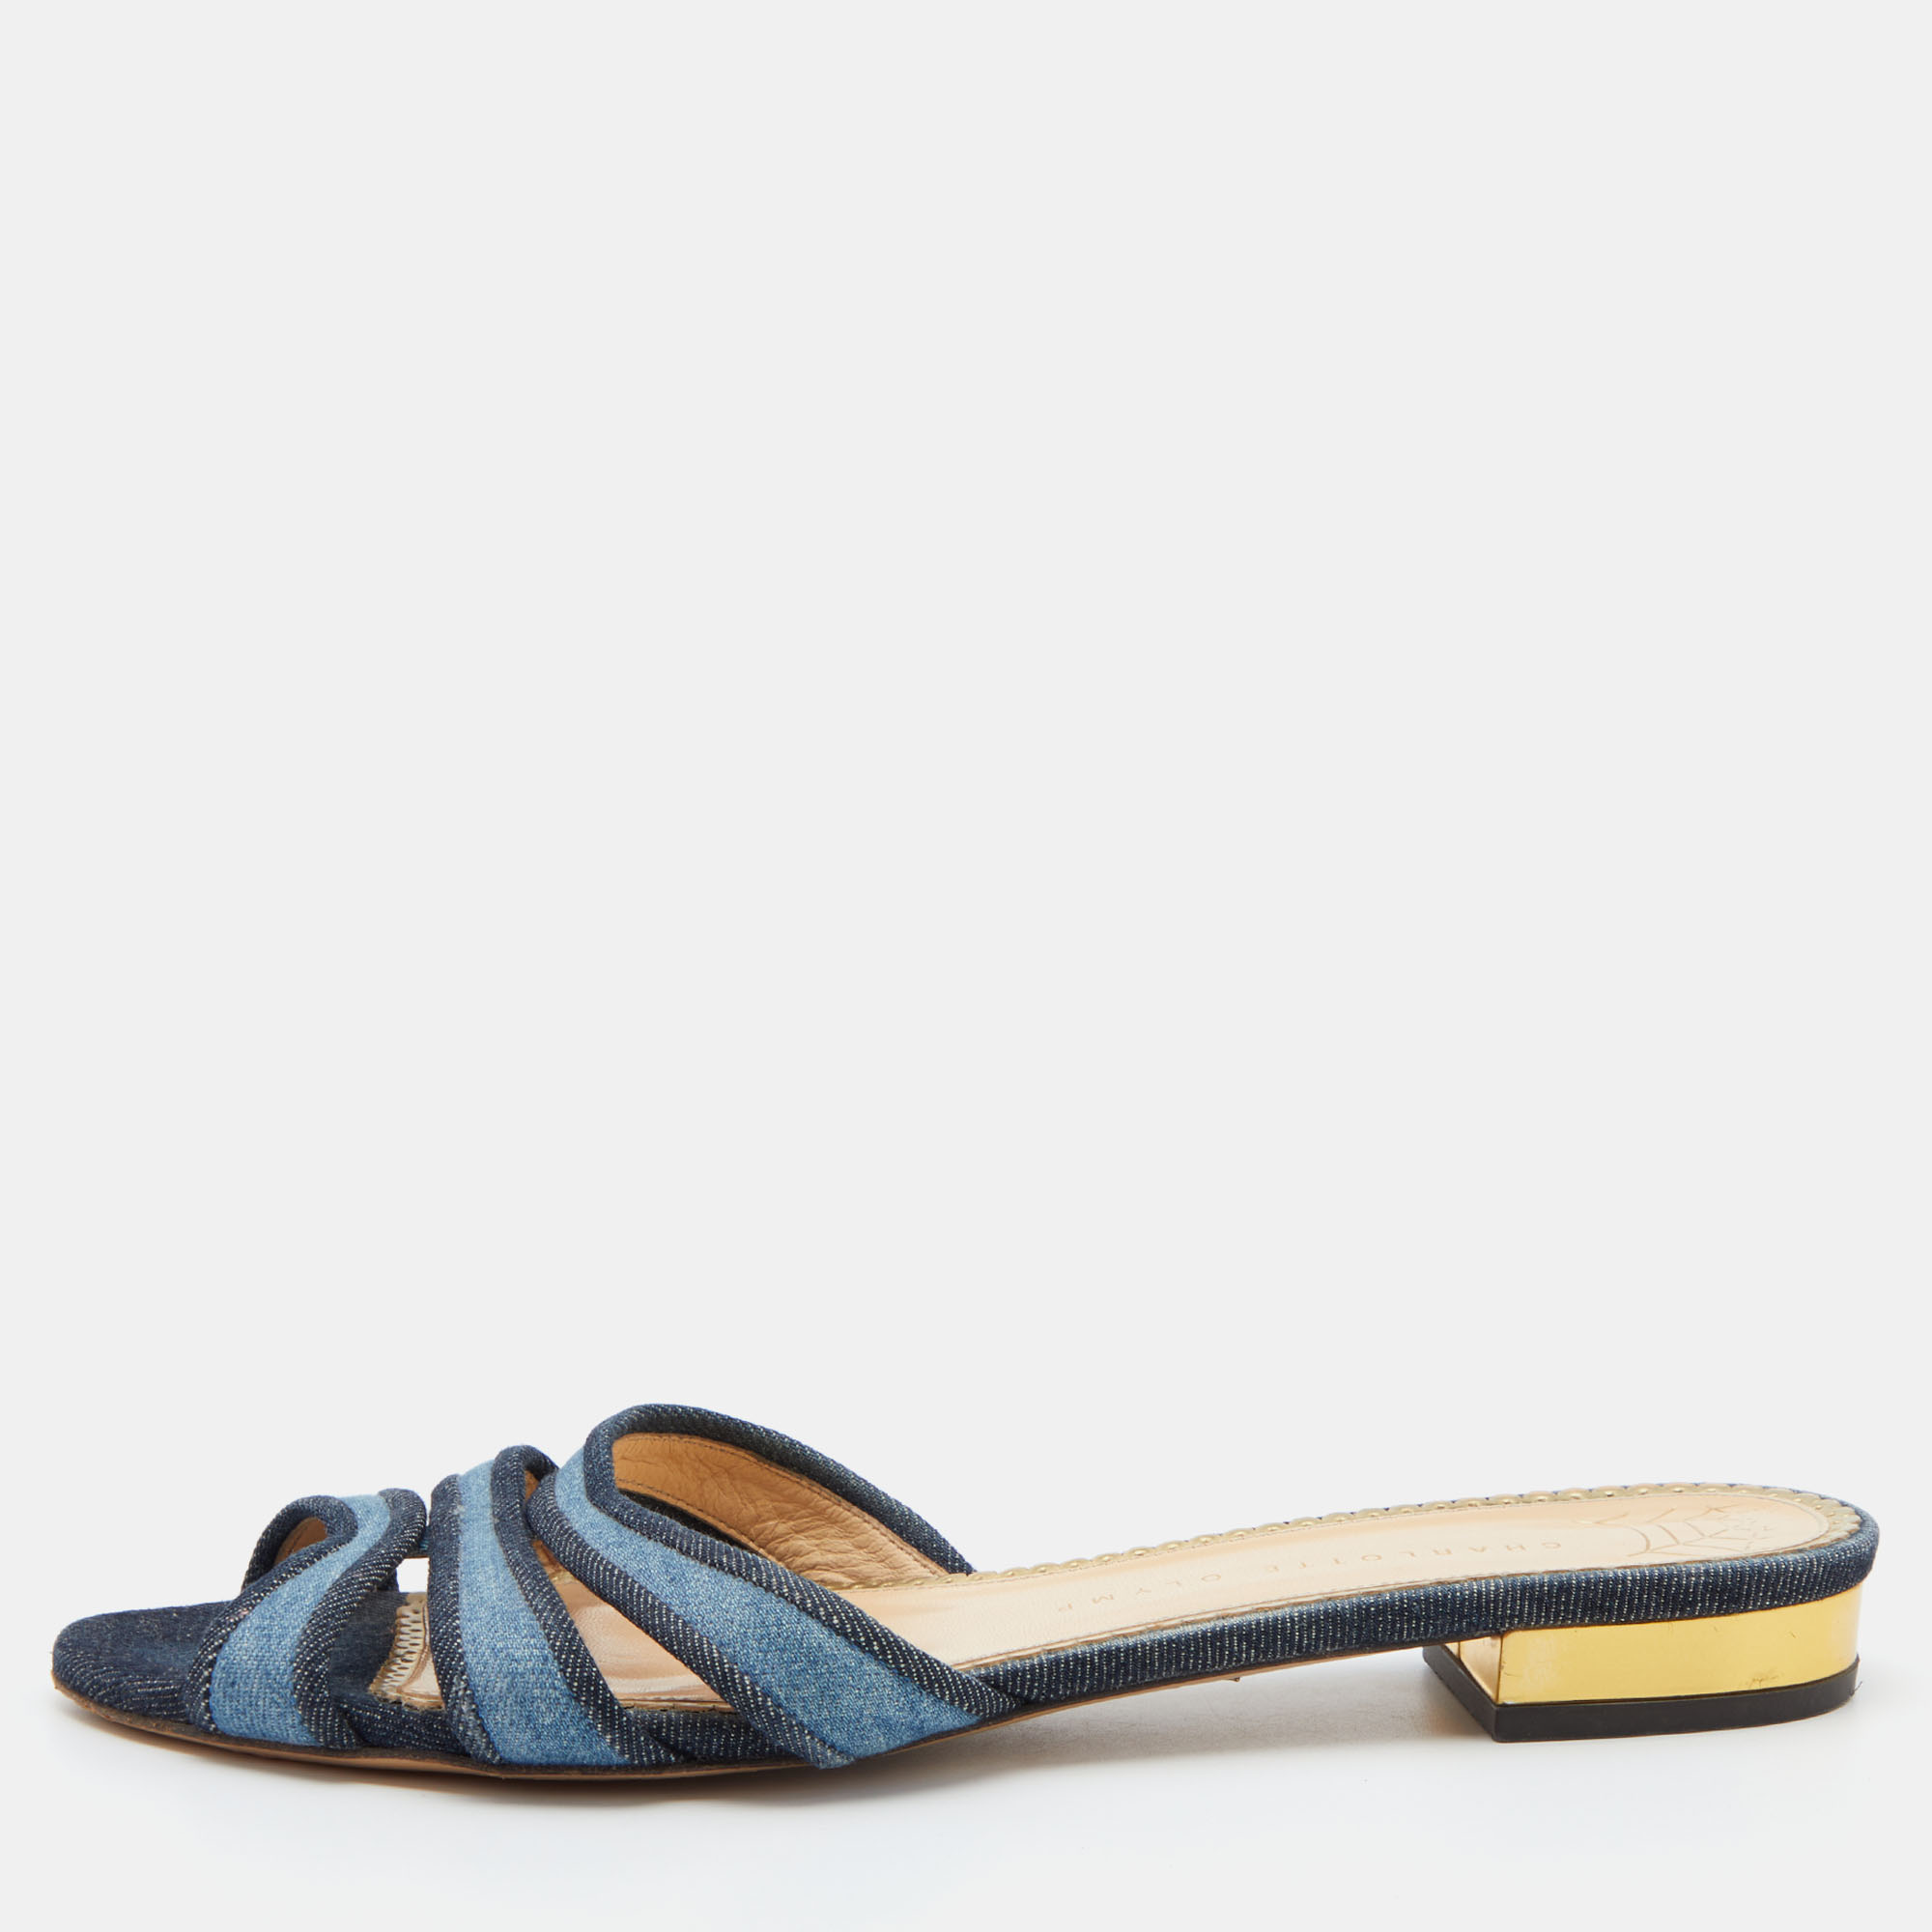 Pre-owned Charlotte Olympia Blue Denim Flat Slides Size 39